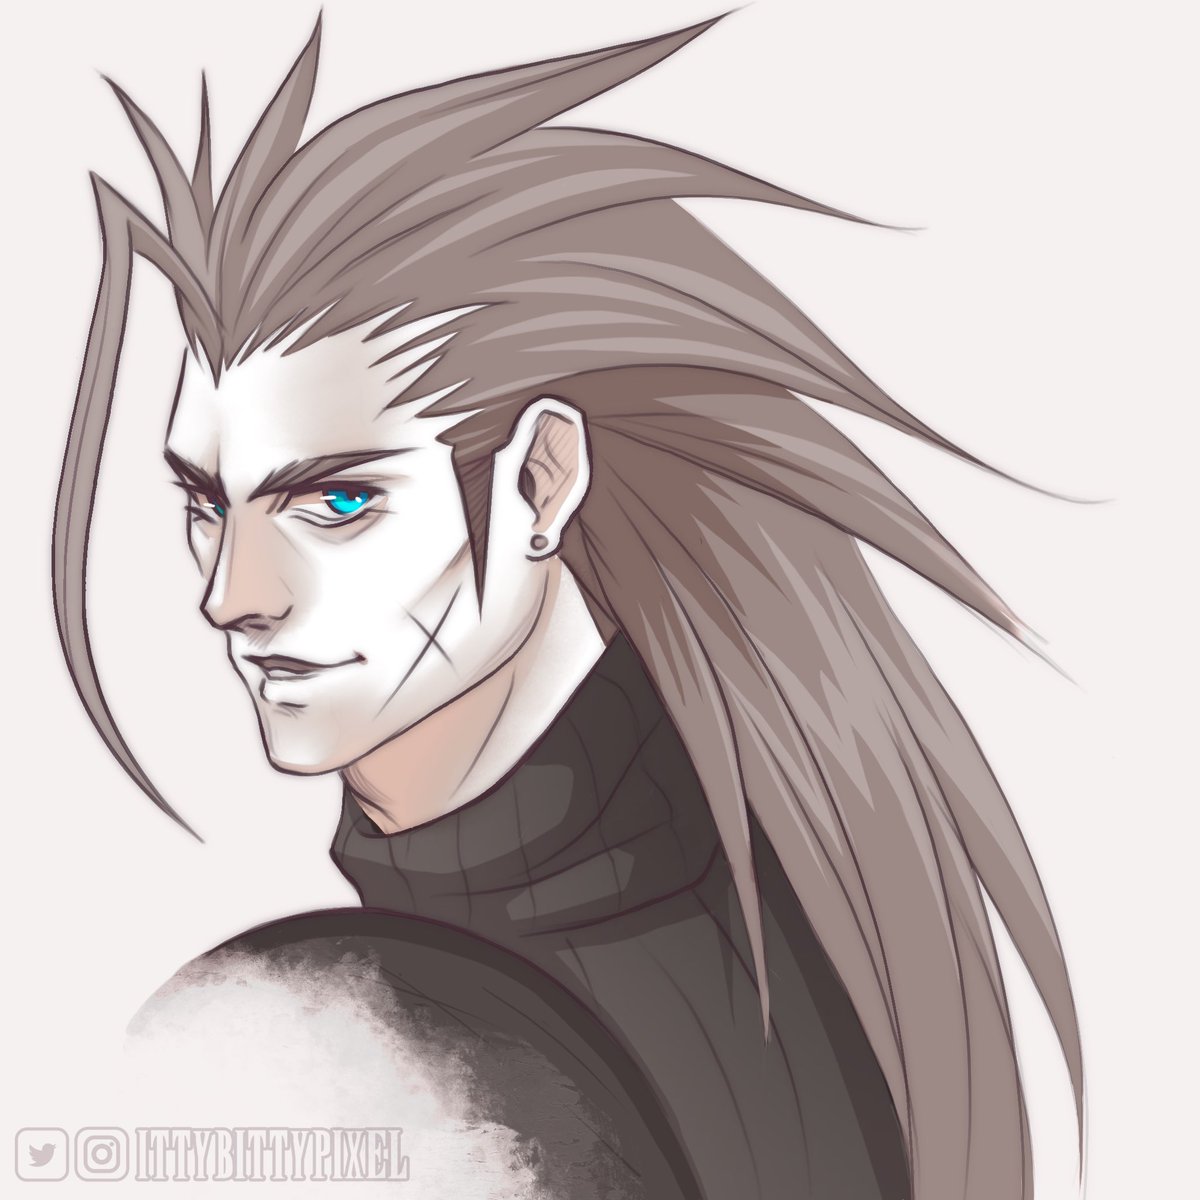 One thing I wanna do this year with my art is, post more sketches and non-finished work. 

I draw so much stuff that doesn’t see the light of day and I think I’d be fun to share more loose stuff. :3

#sketch #art #ZackFair #CrisisCoreFinalFantasyVIIReunion #ffviii #FF7Remake